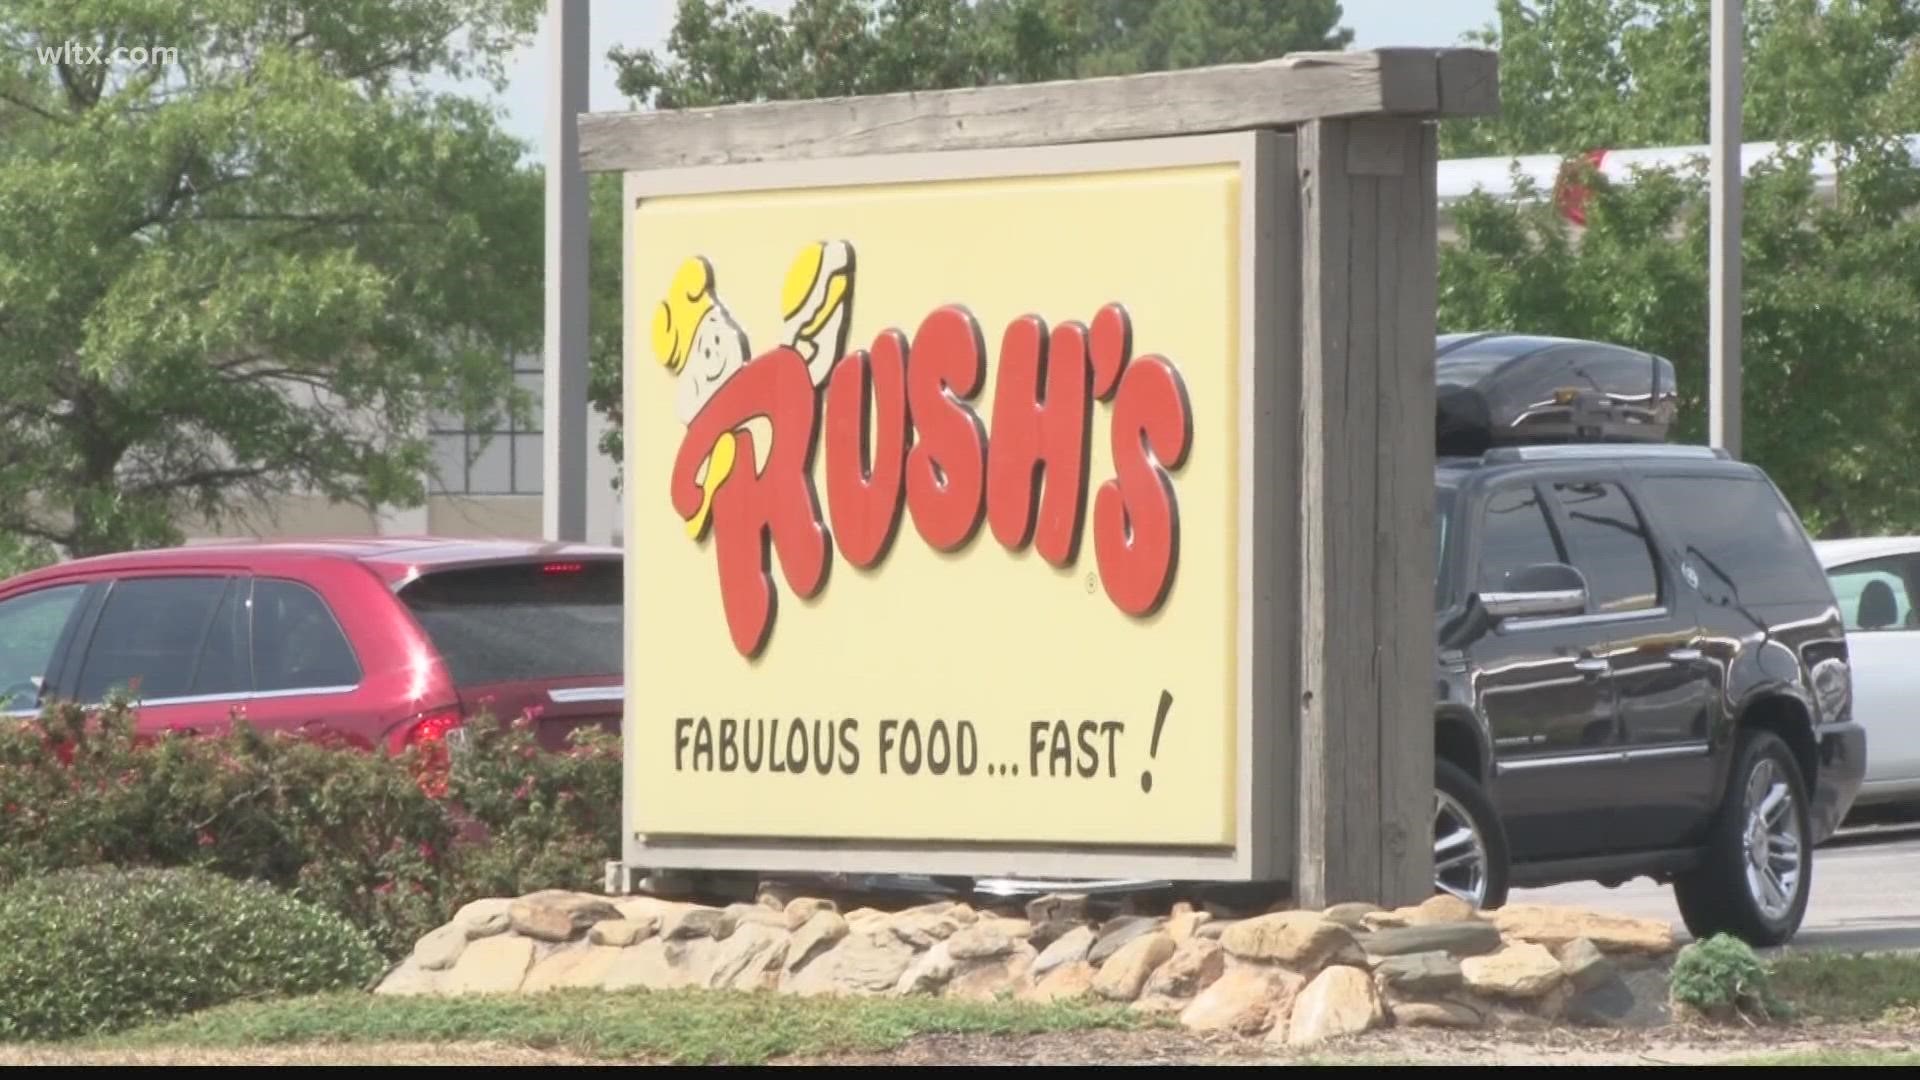 The incident happened Wednesday night at the Rush's on Harbison Blvd.